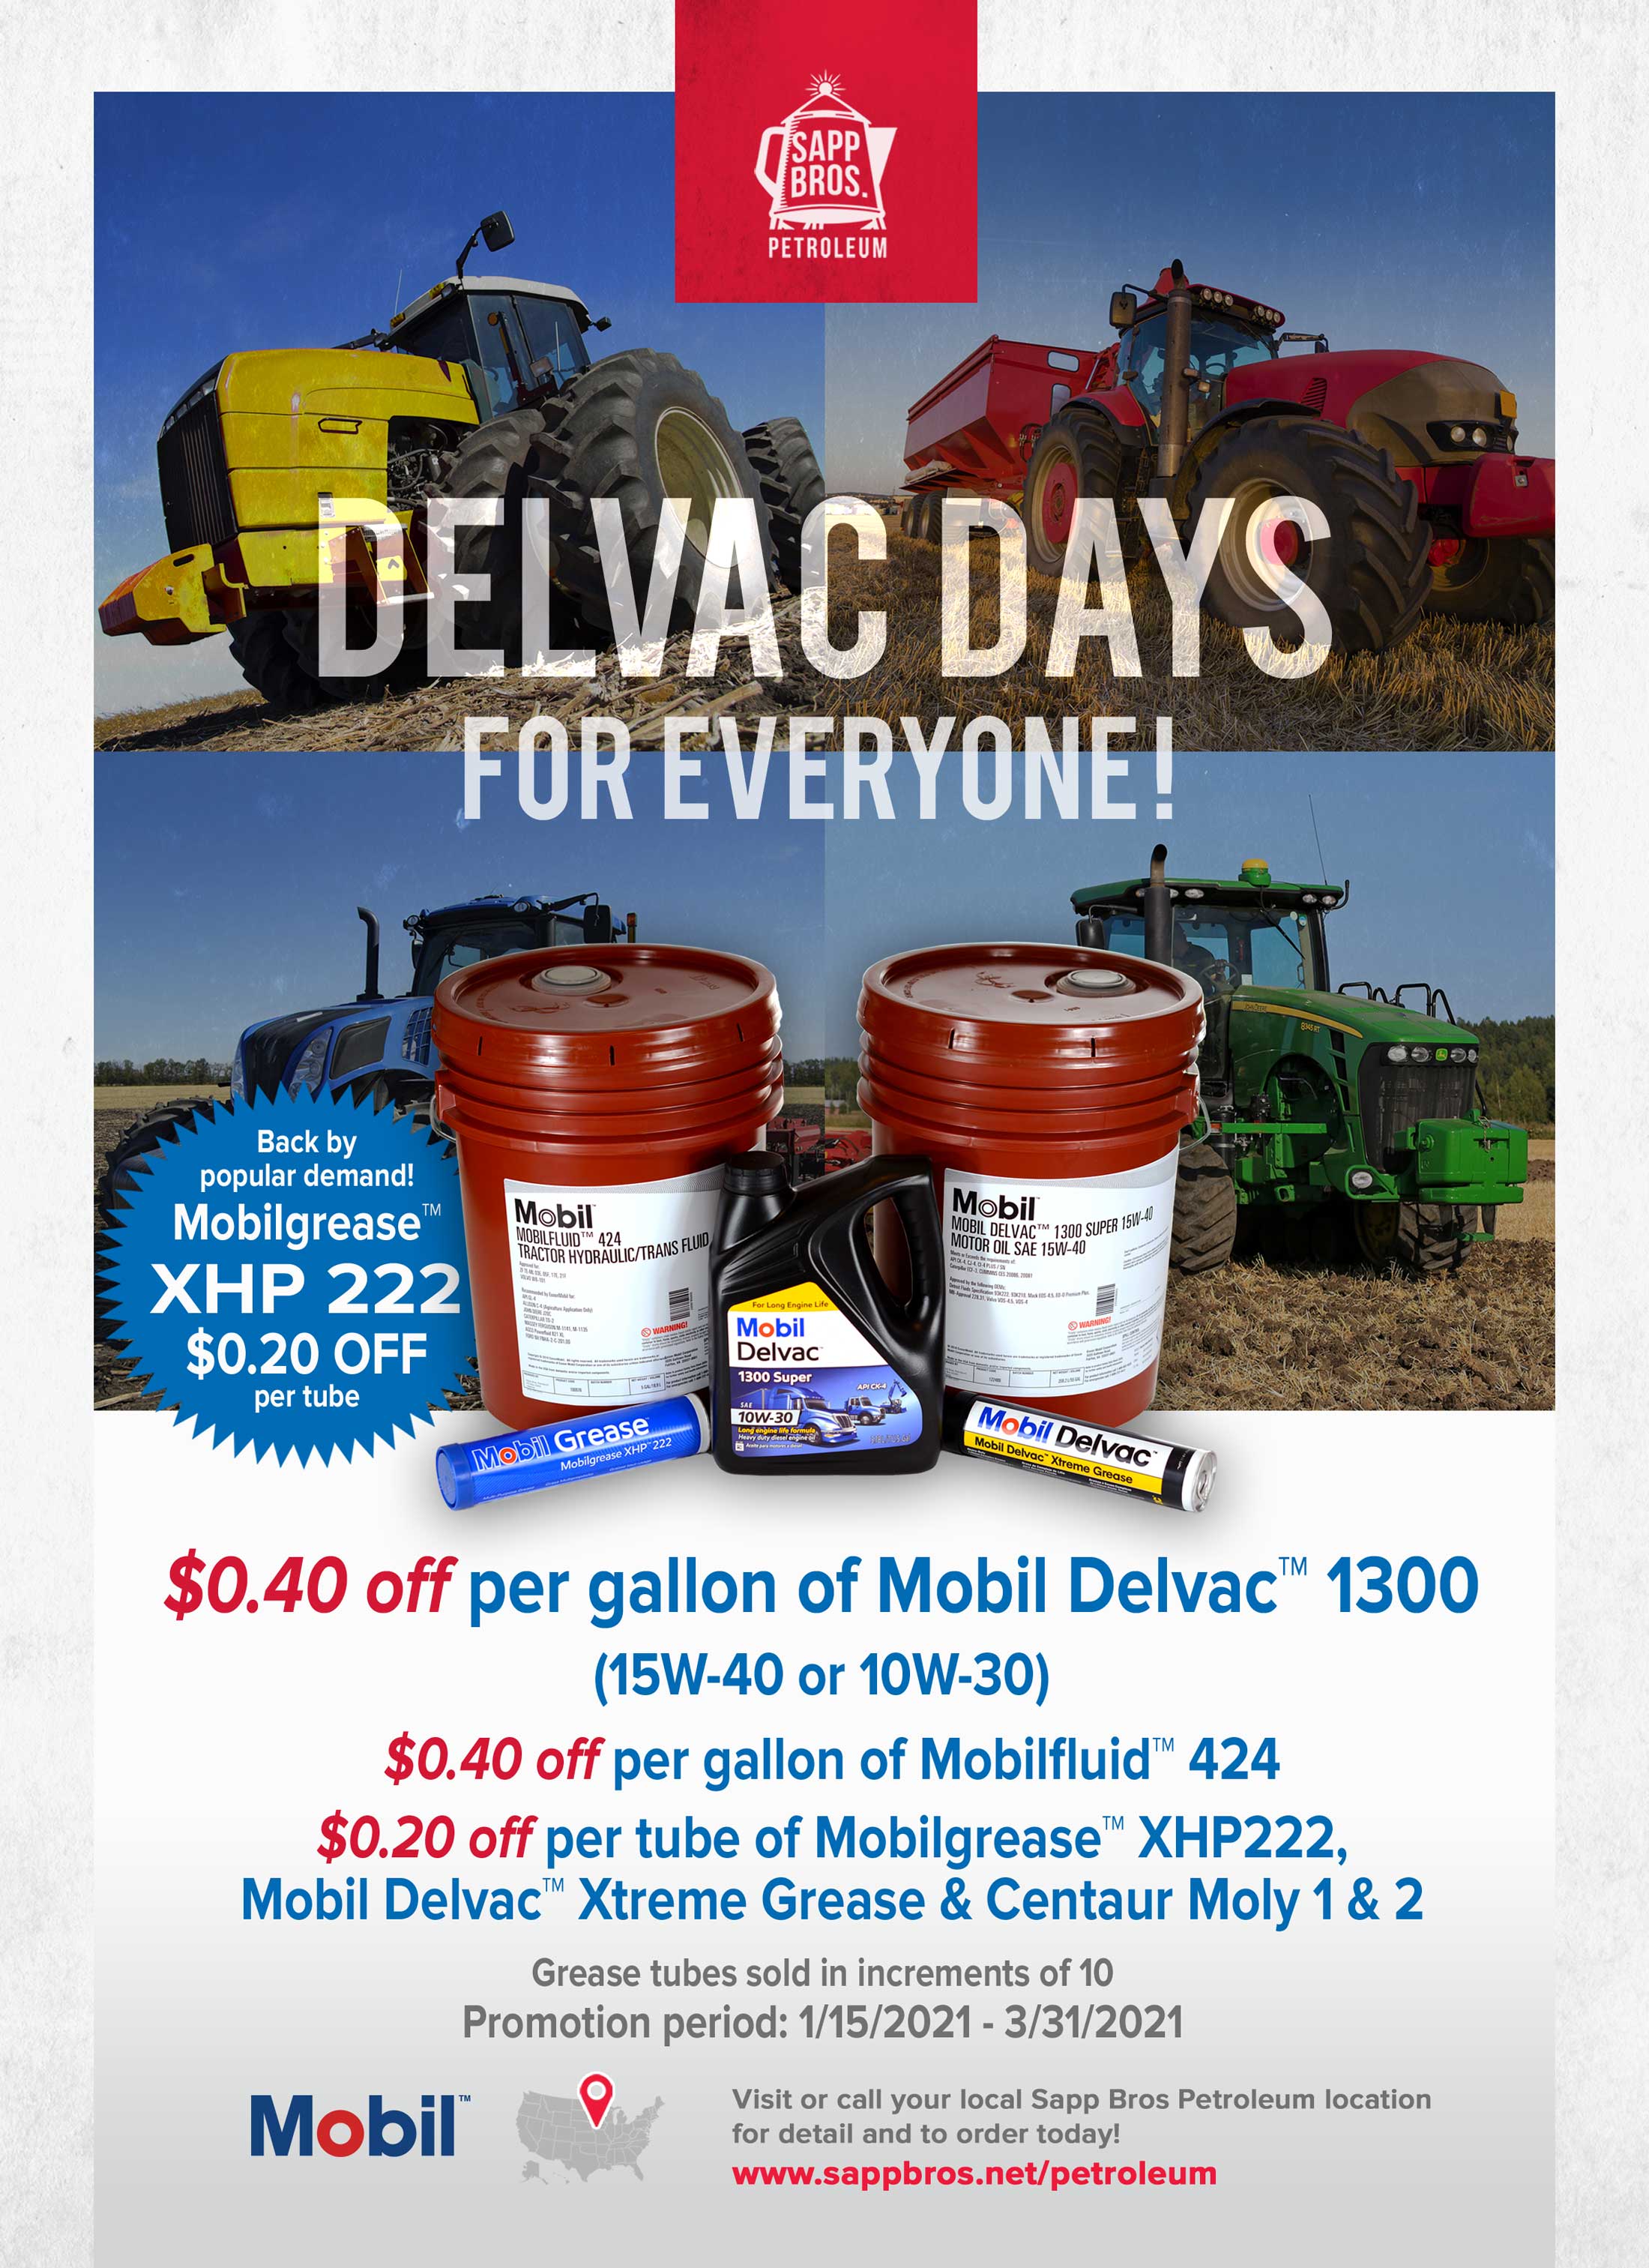 Delvac Days For Everyone!